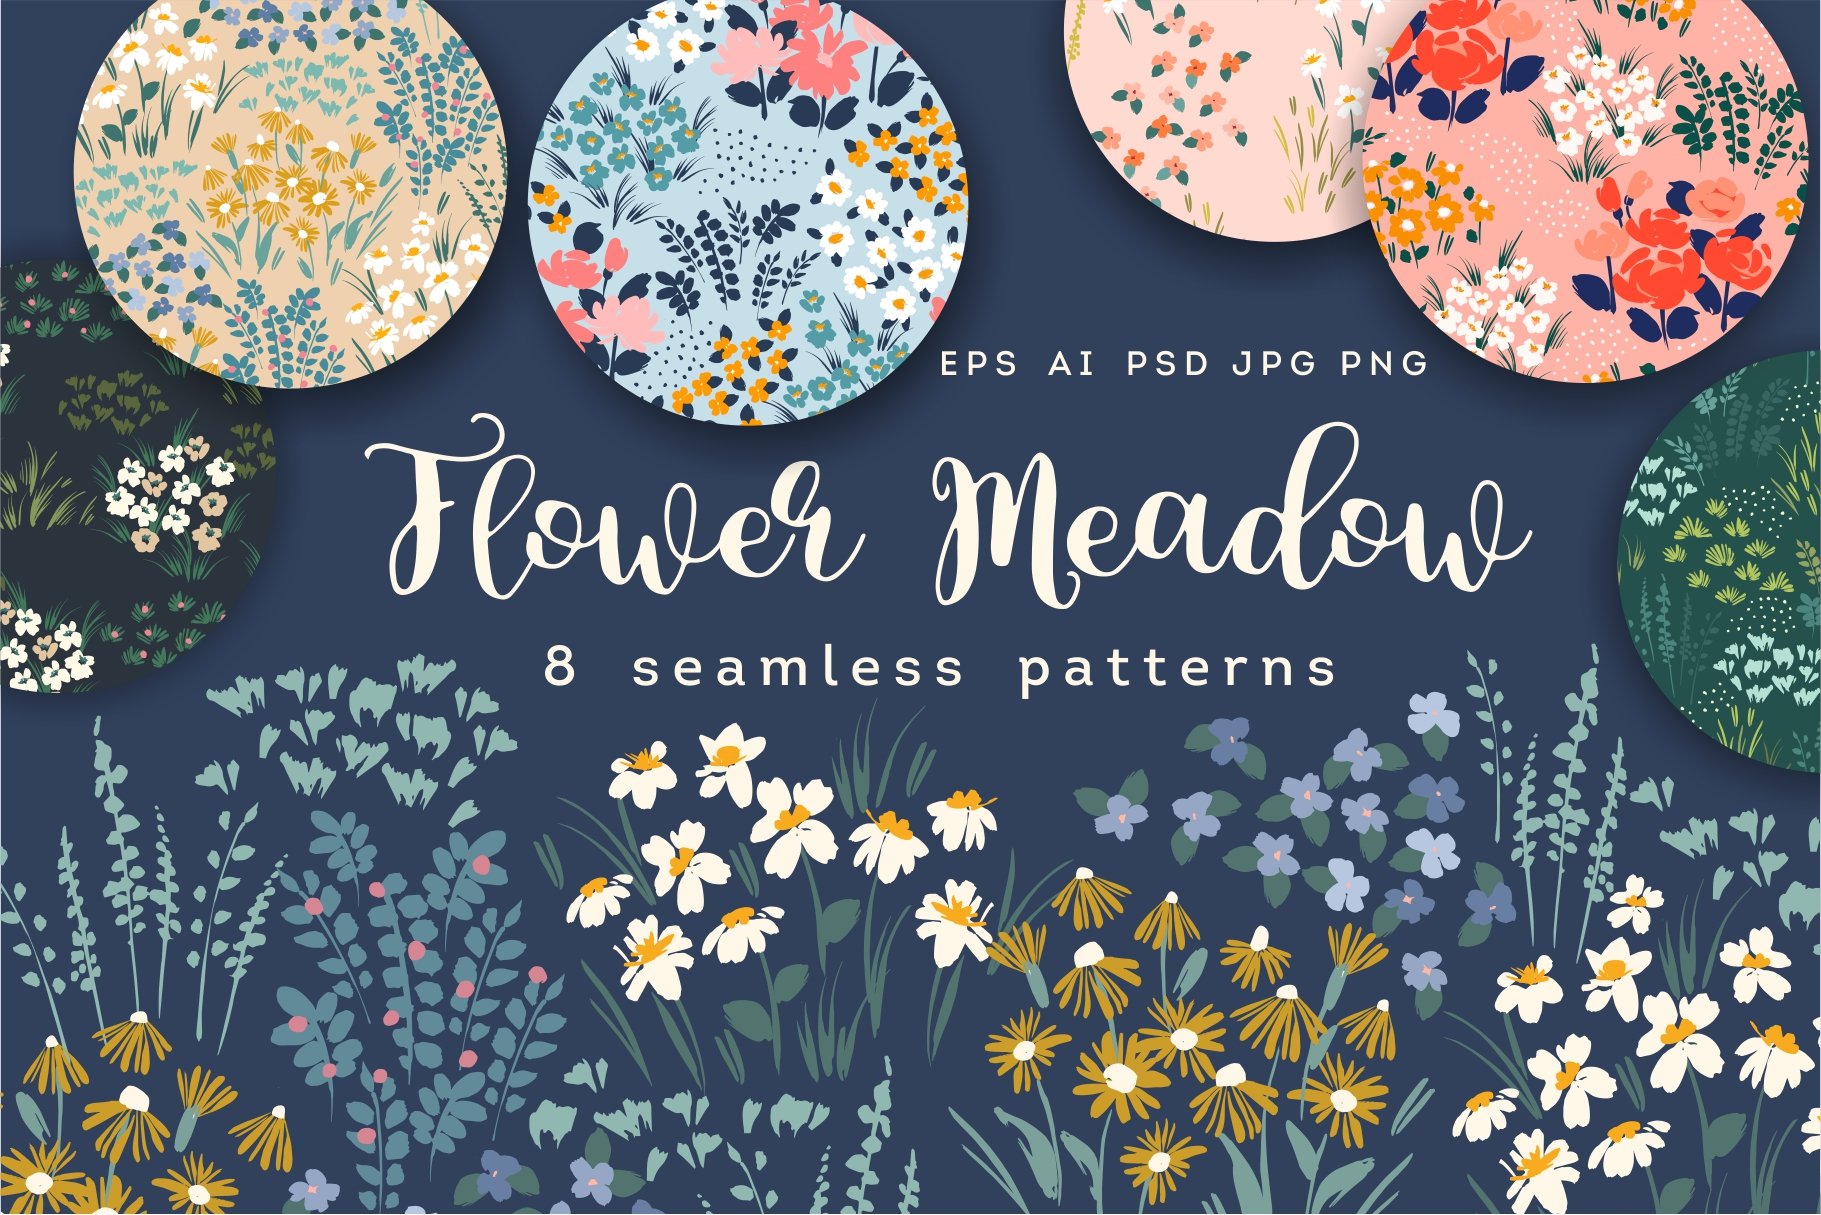 Flower Meadow. 8 seamless patterns cover image.